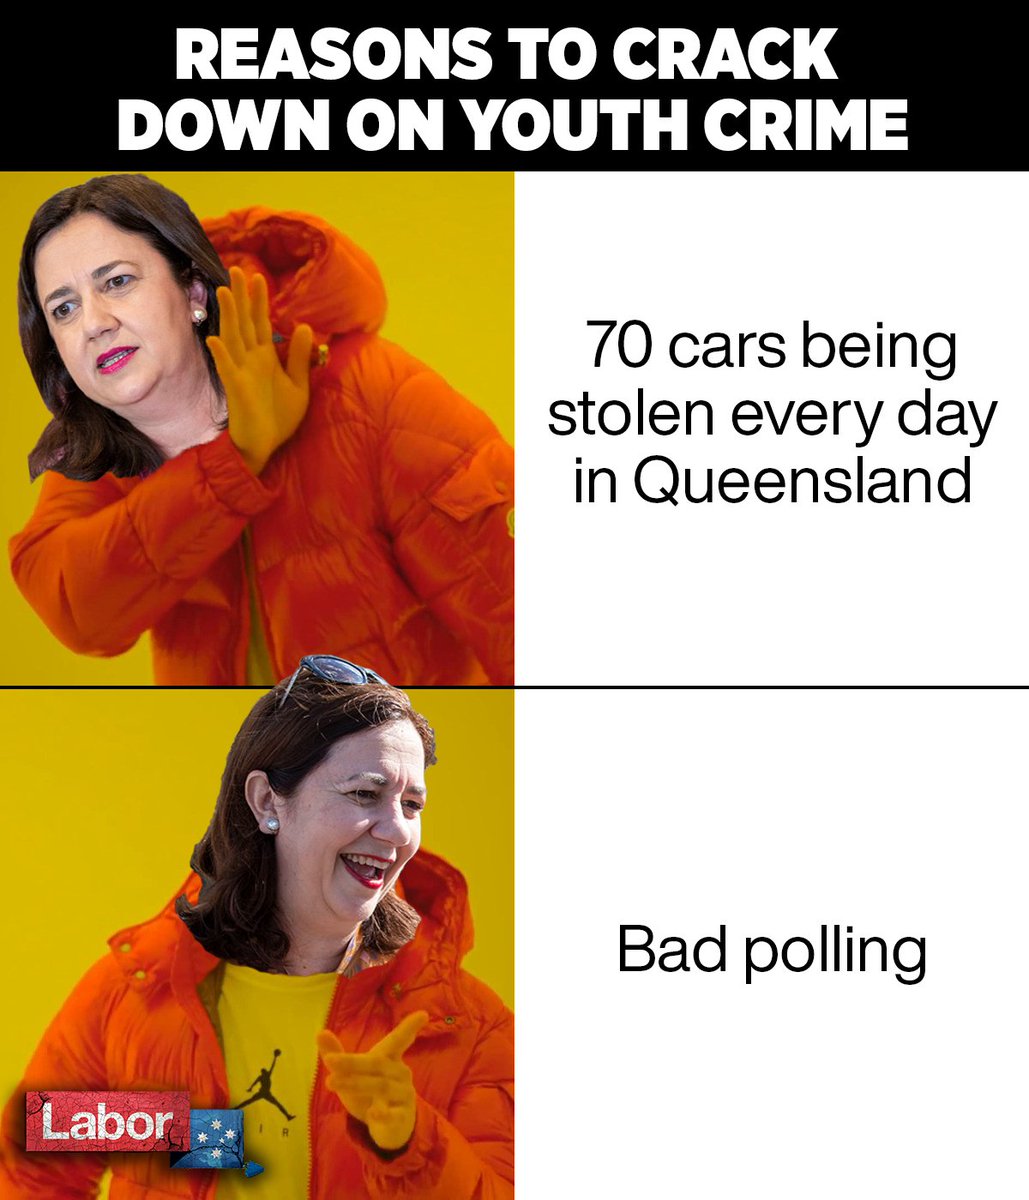 LNP – Liberal National Party: The Palaszczuk Labor Government weakened youth crime laws in 2015…